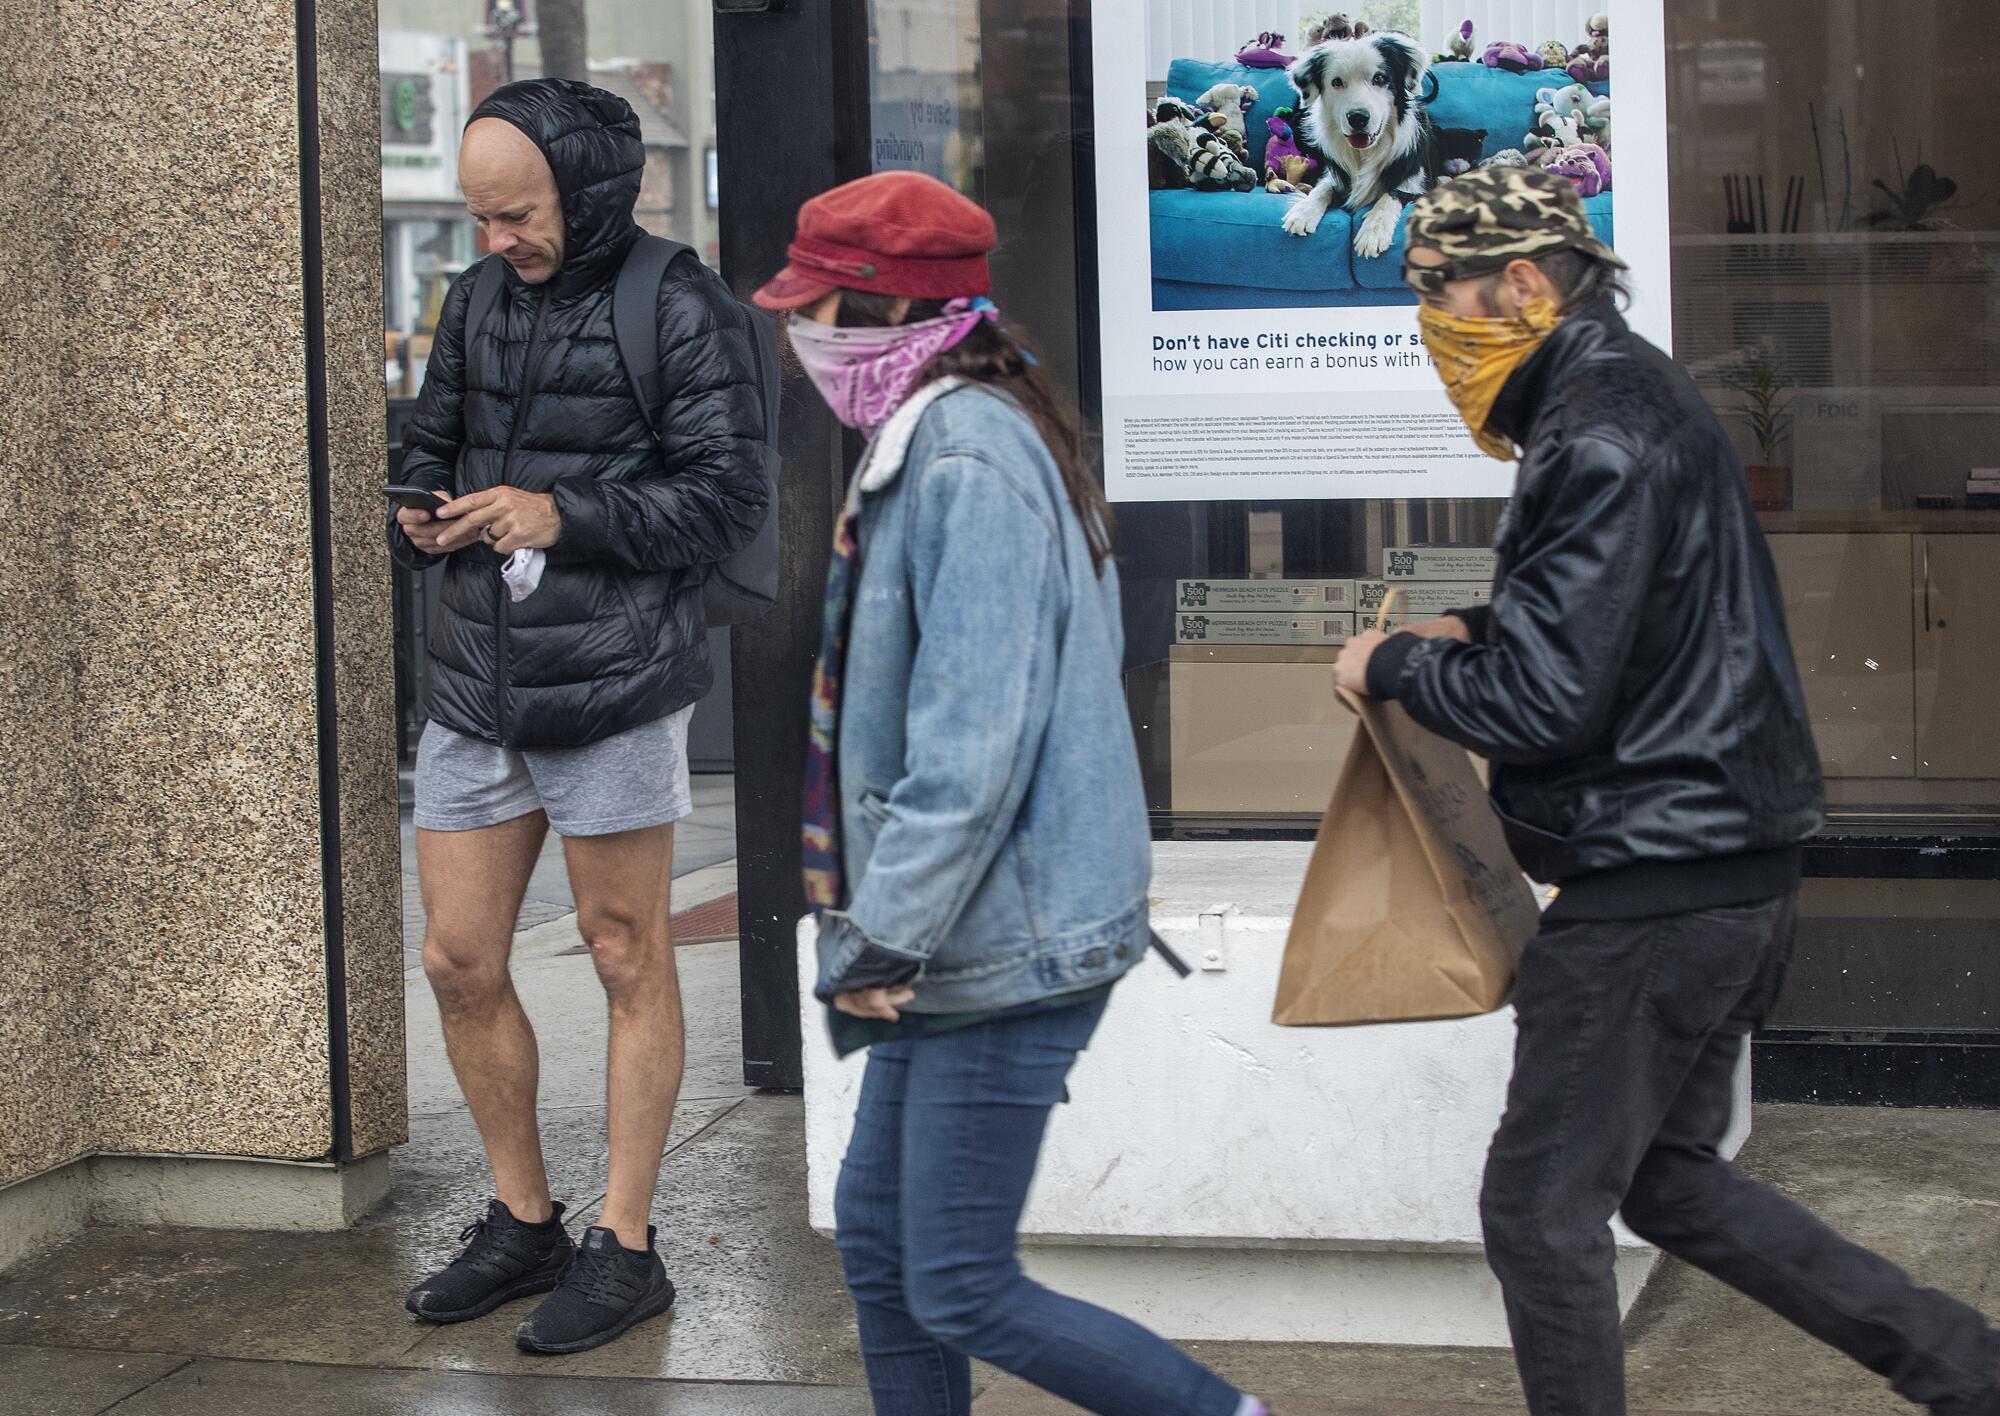 People wearing bandannas as masks walk on a sidewalk next to a man in a coat and short pants